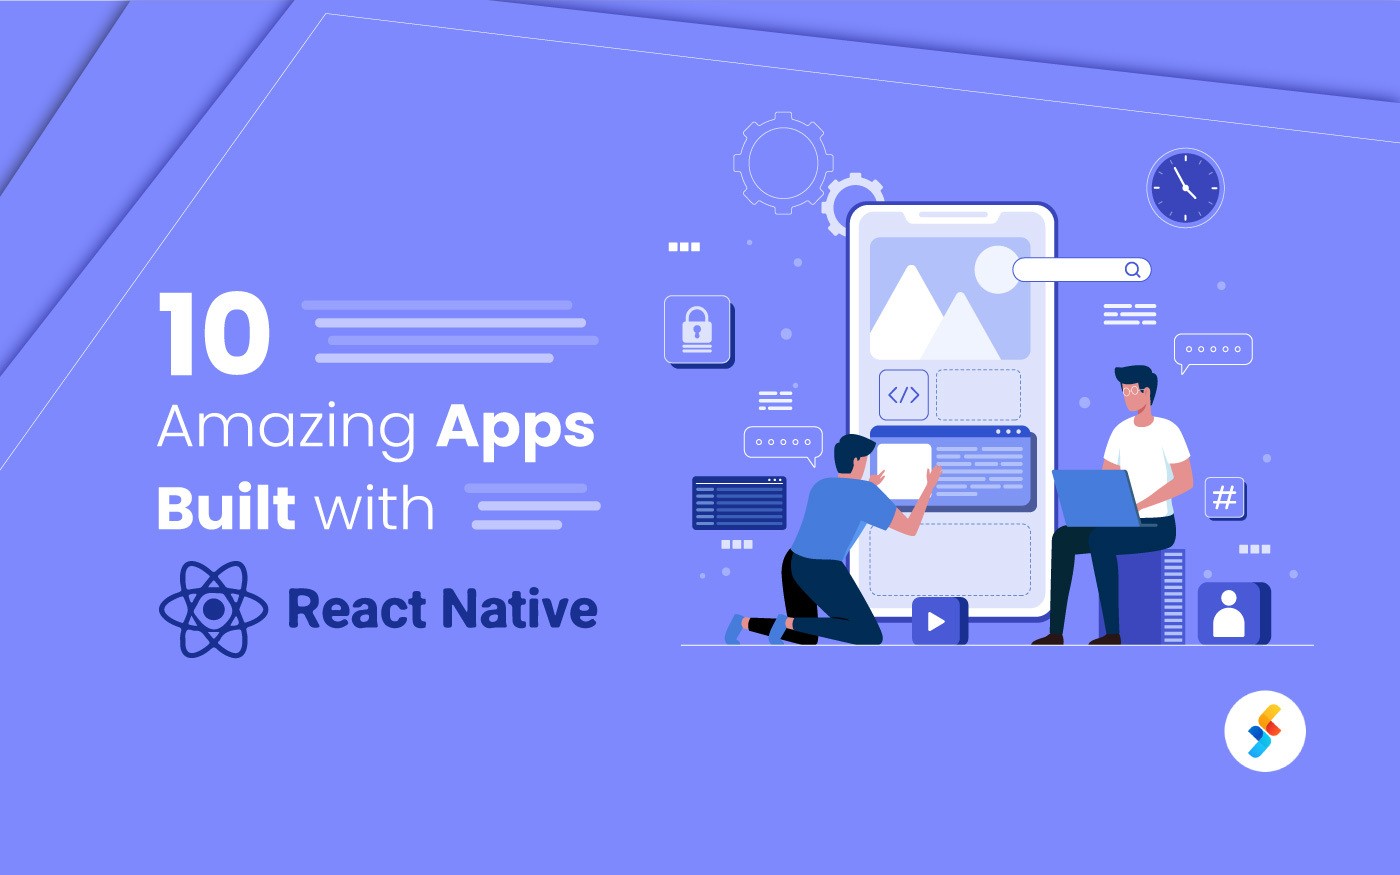 Top 10 Amazing Apps Built with React Native